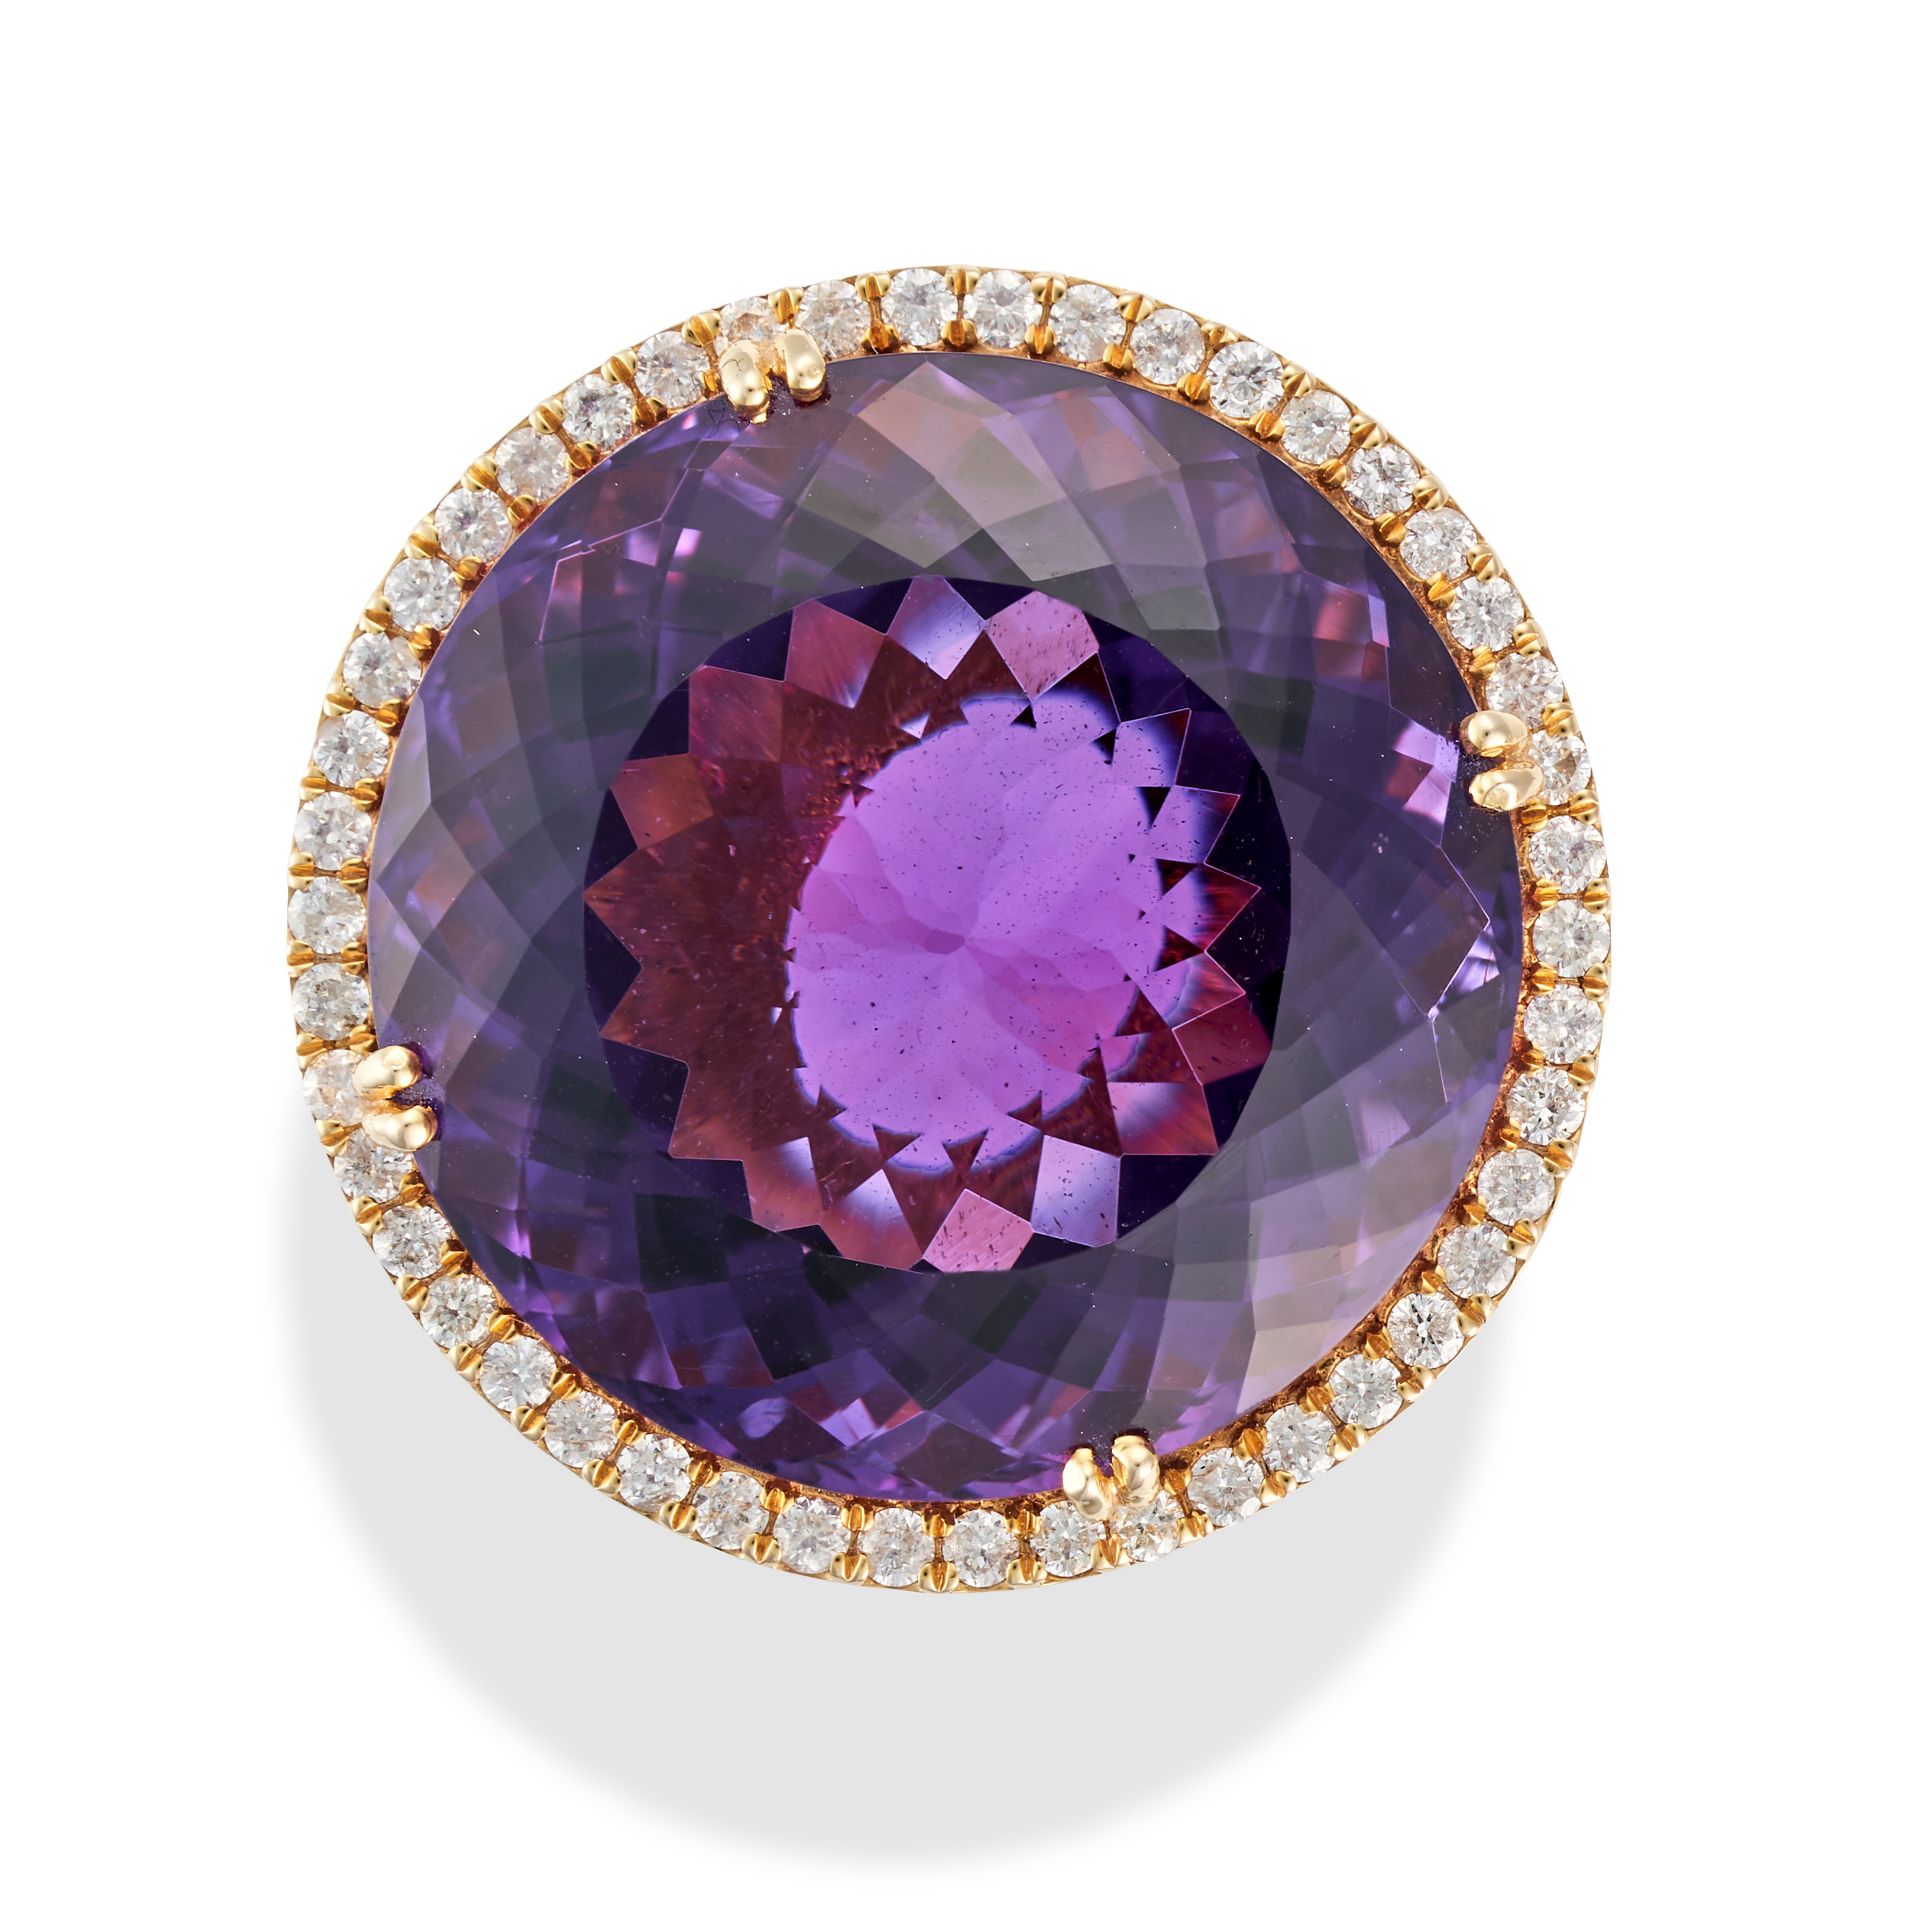 AN AMETHYST AND DIAMOND DRESS RING set with a round cut amethyst of 31.34 carats in a border of r...